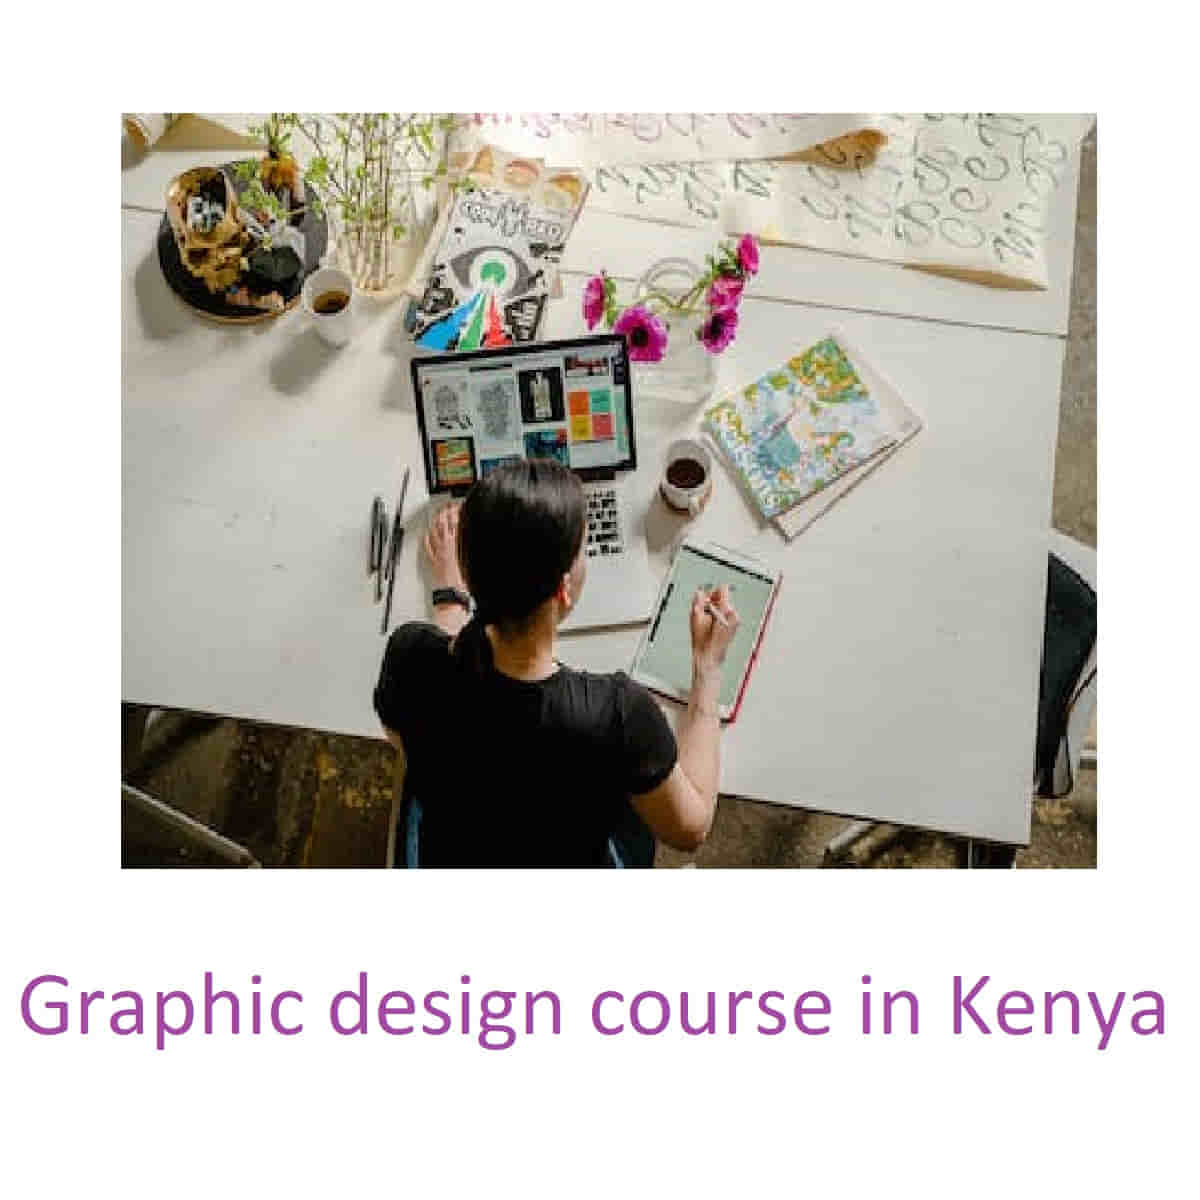 Graphic design course in Kenya